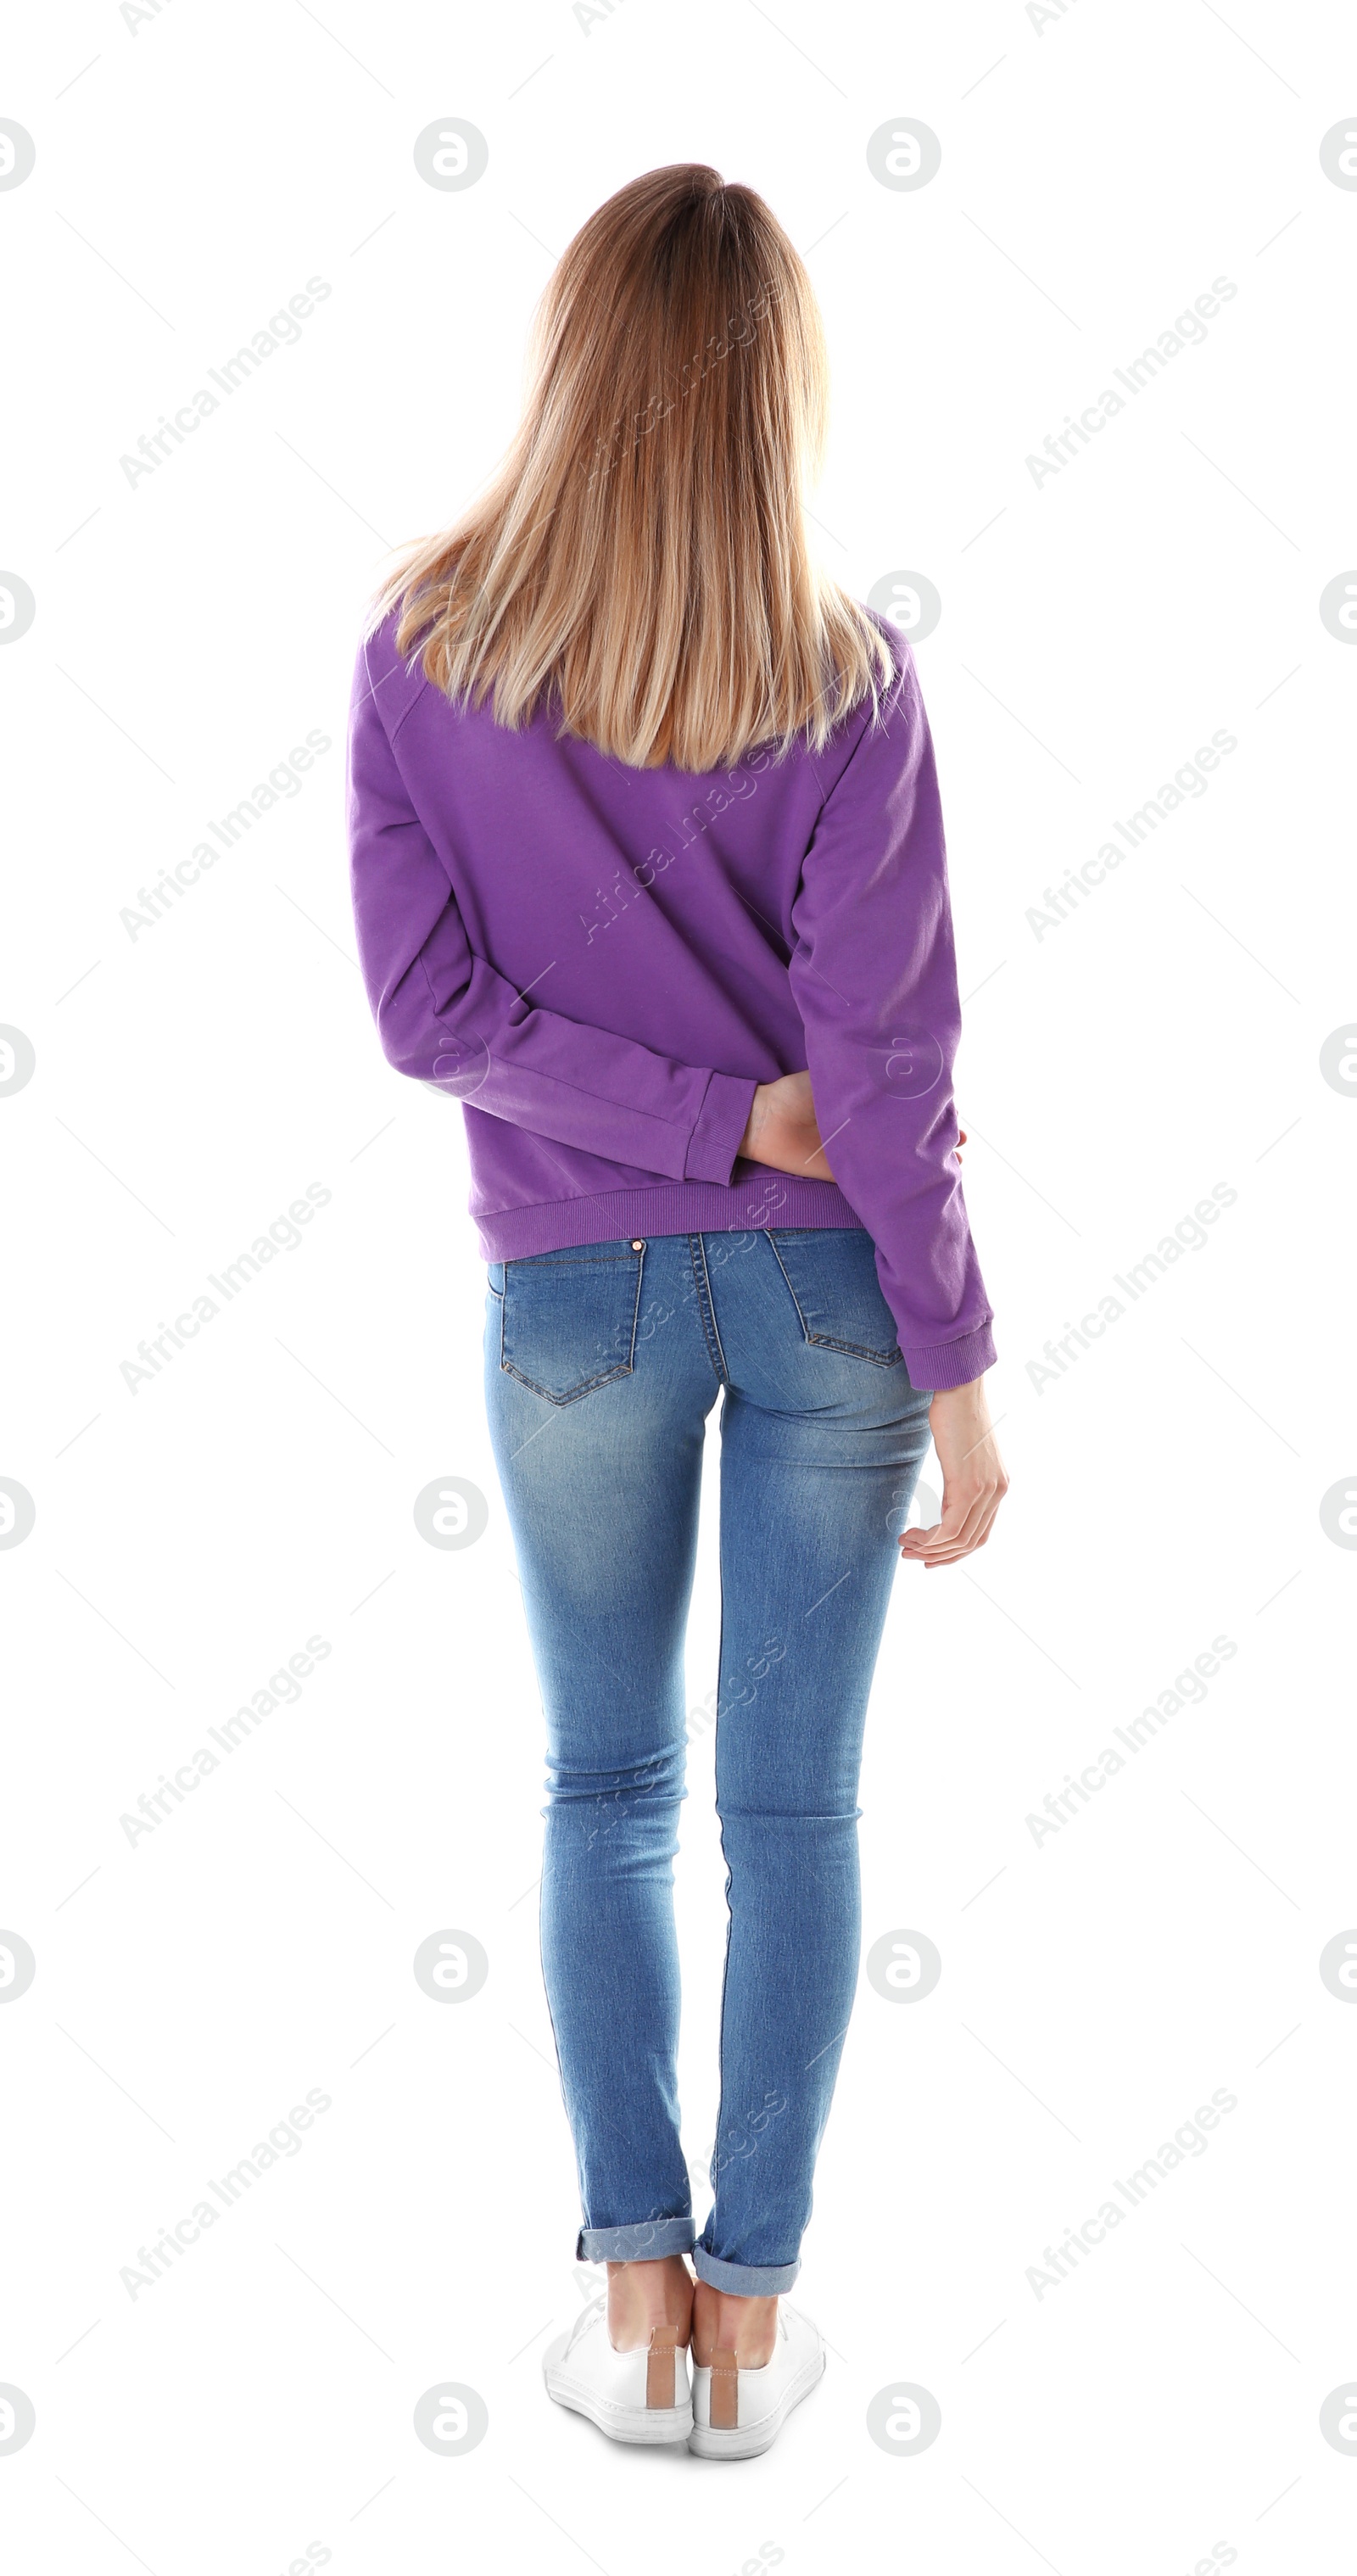 Photo of Blonde woman with long hair posing on white background